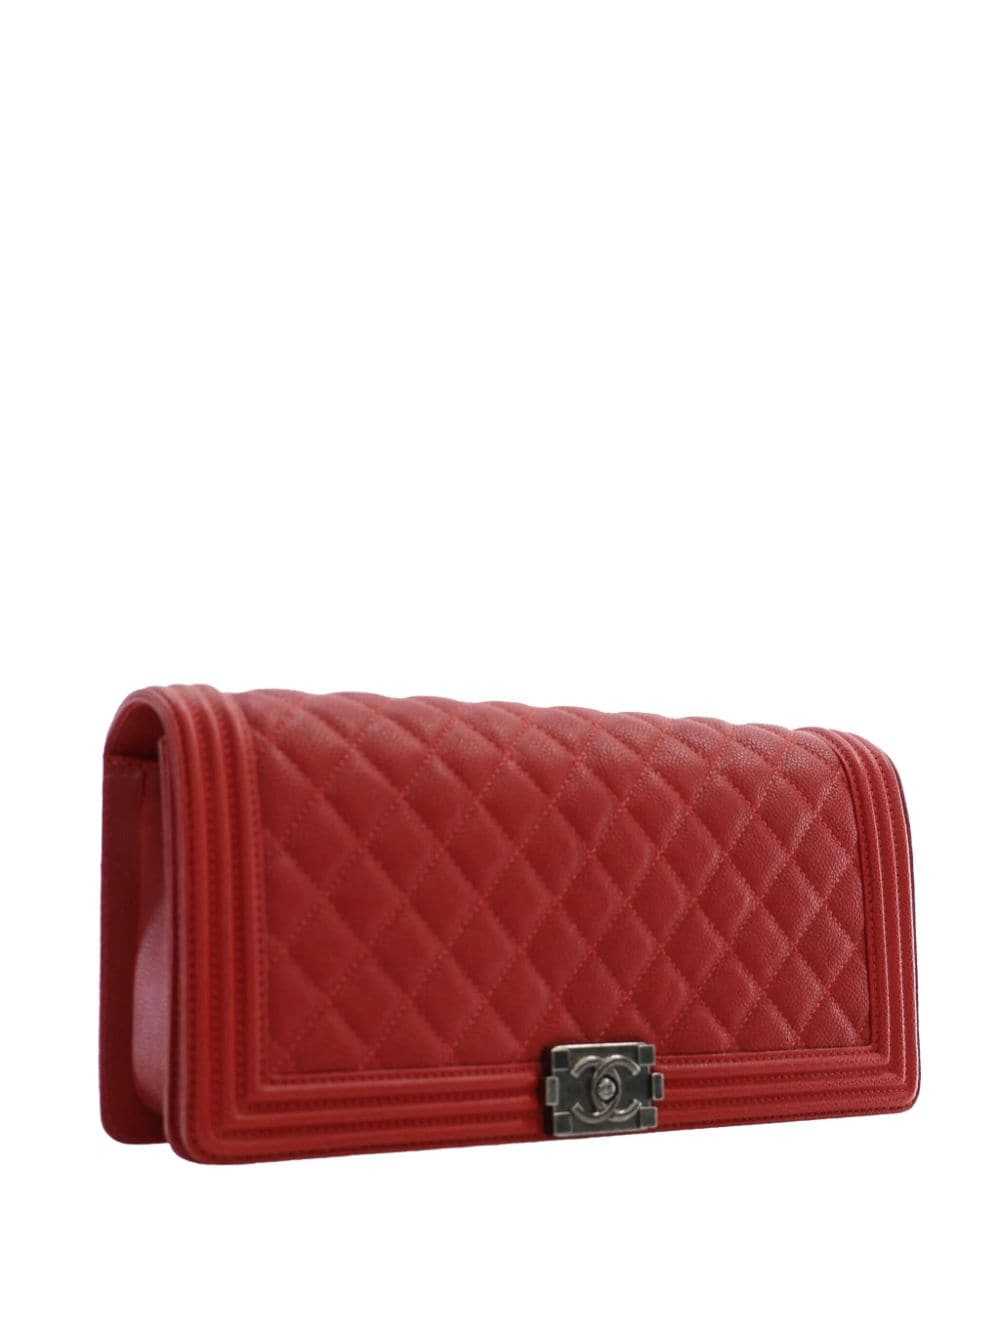 CHANEL Pre-Owned 2016-2017 Quilted Caviar Boy clu… - image 4